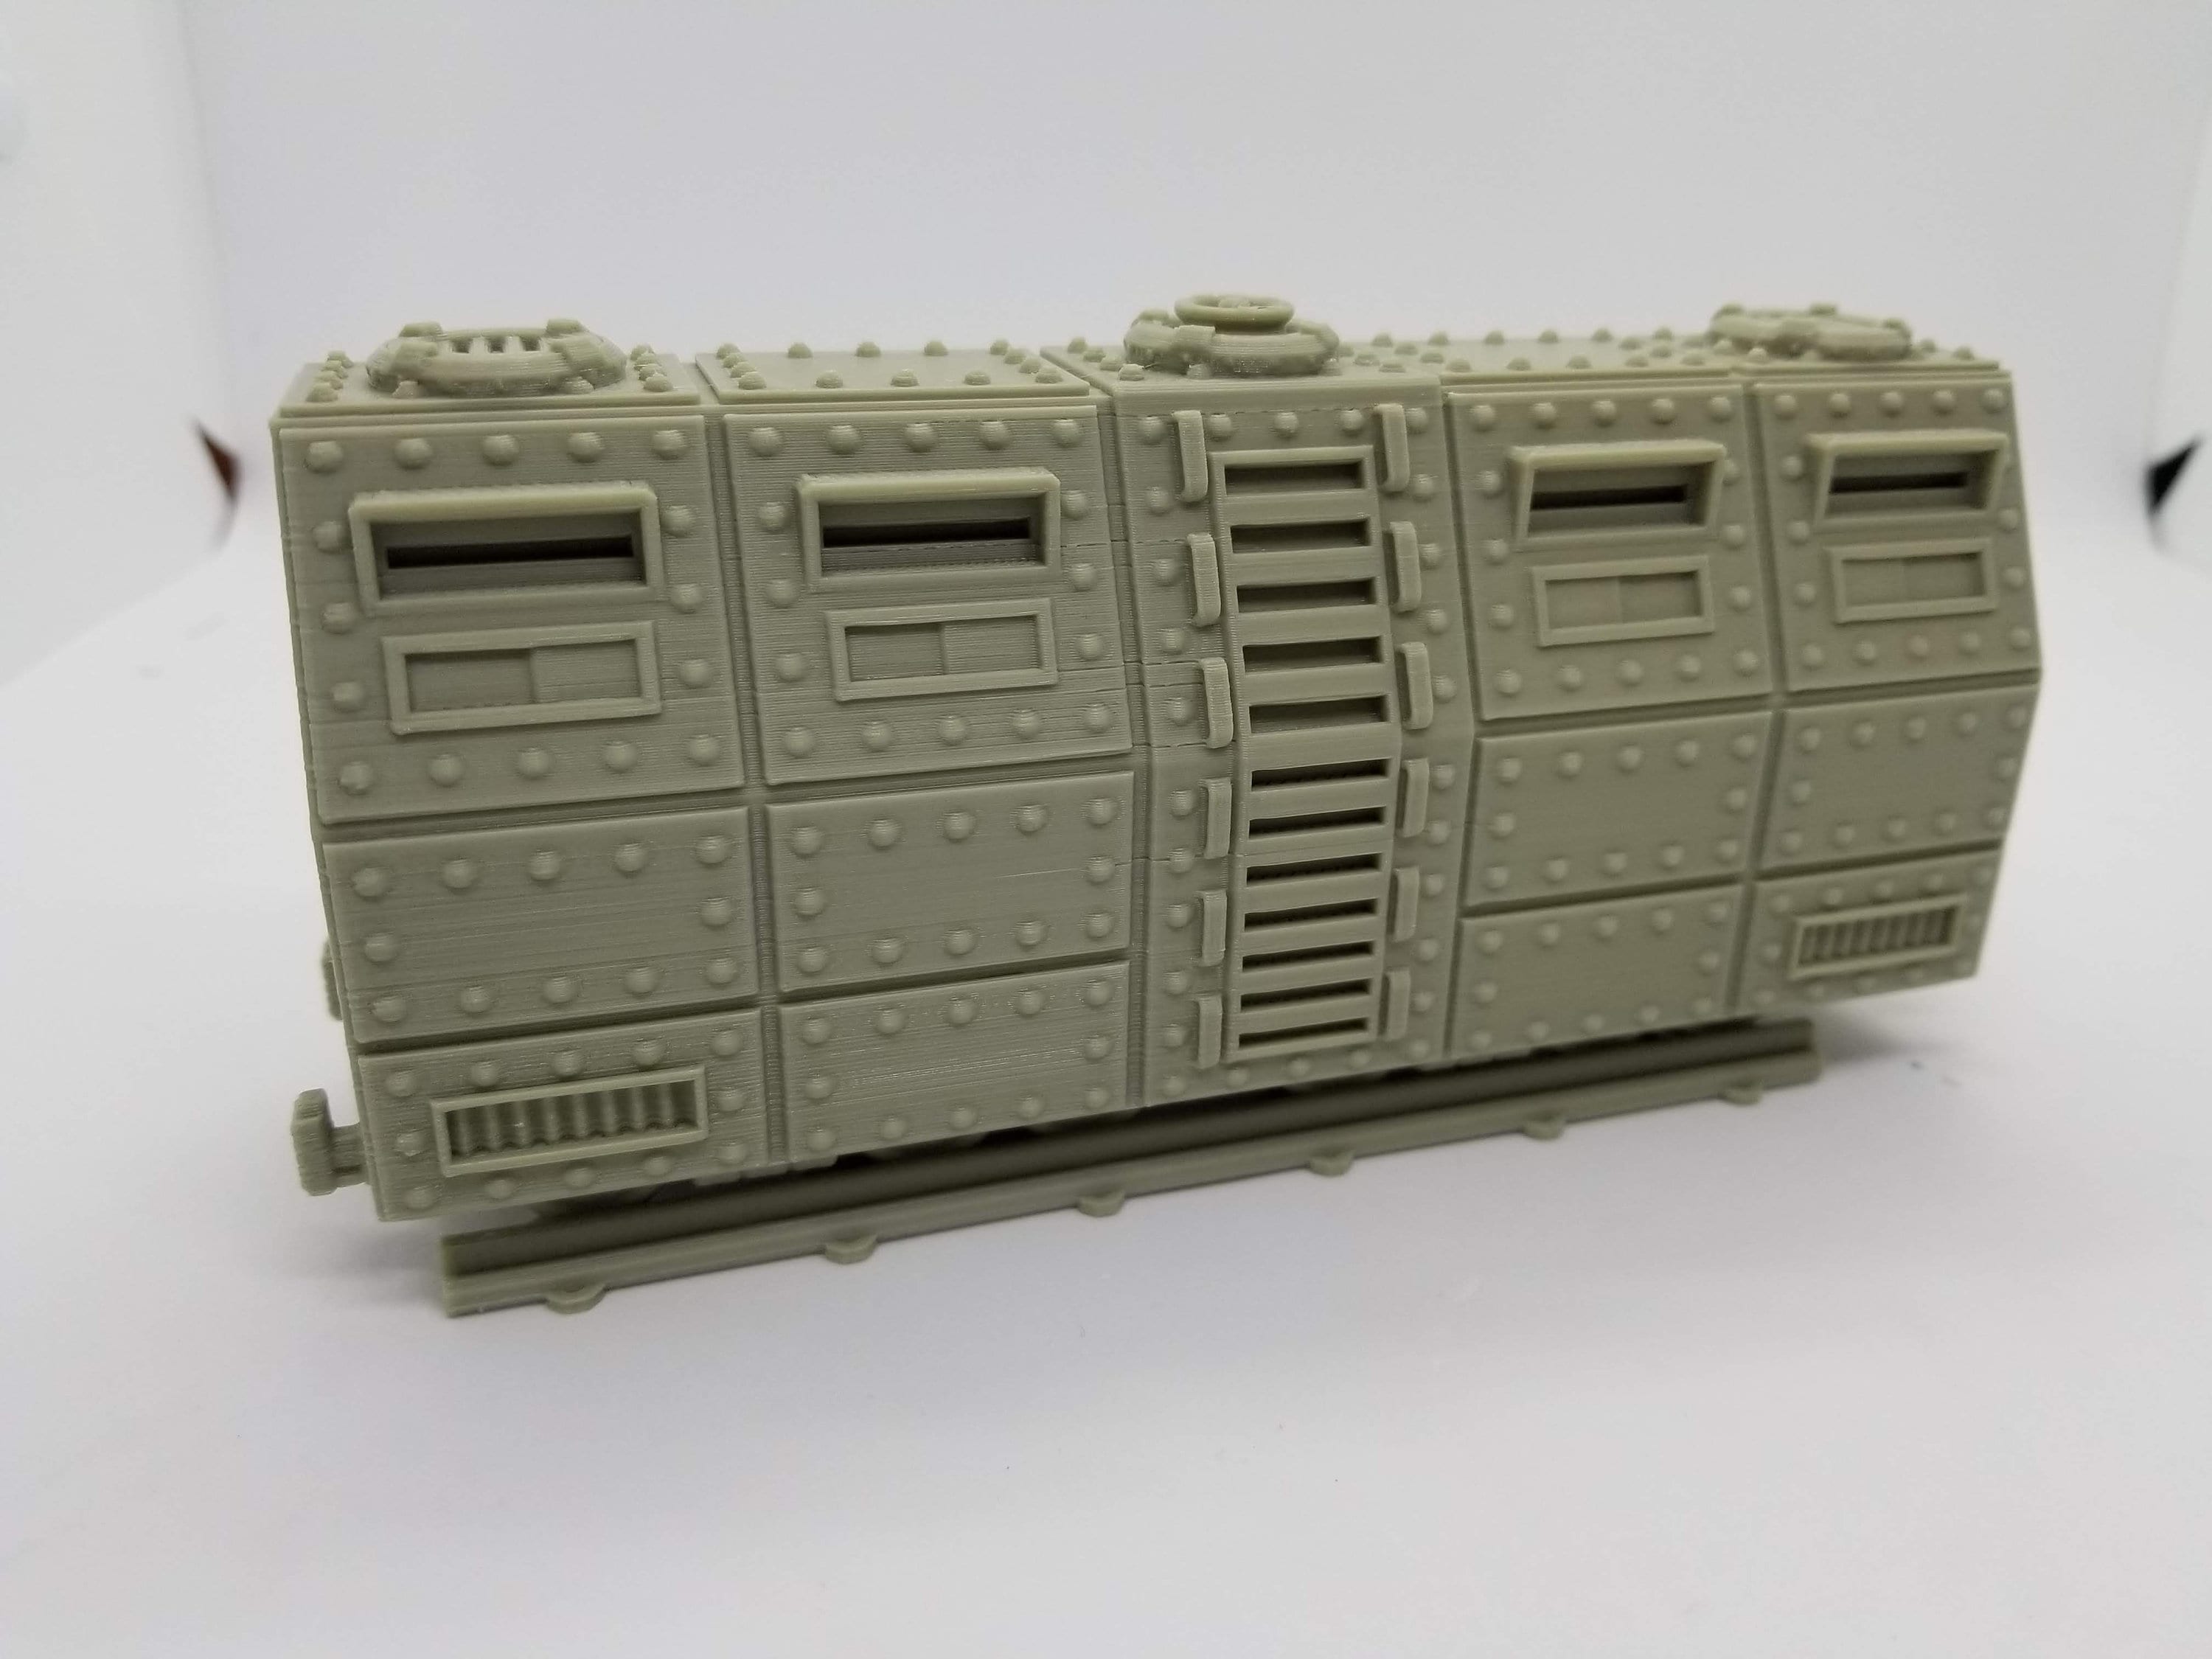 Sci-Fi Train Armored Car Add-On/ 28mm Wargaming Terrain / Warlayer /Print to Order / 3d Printed/Licensed Printer